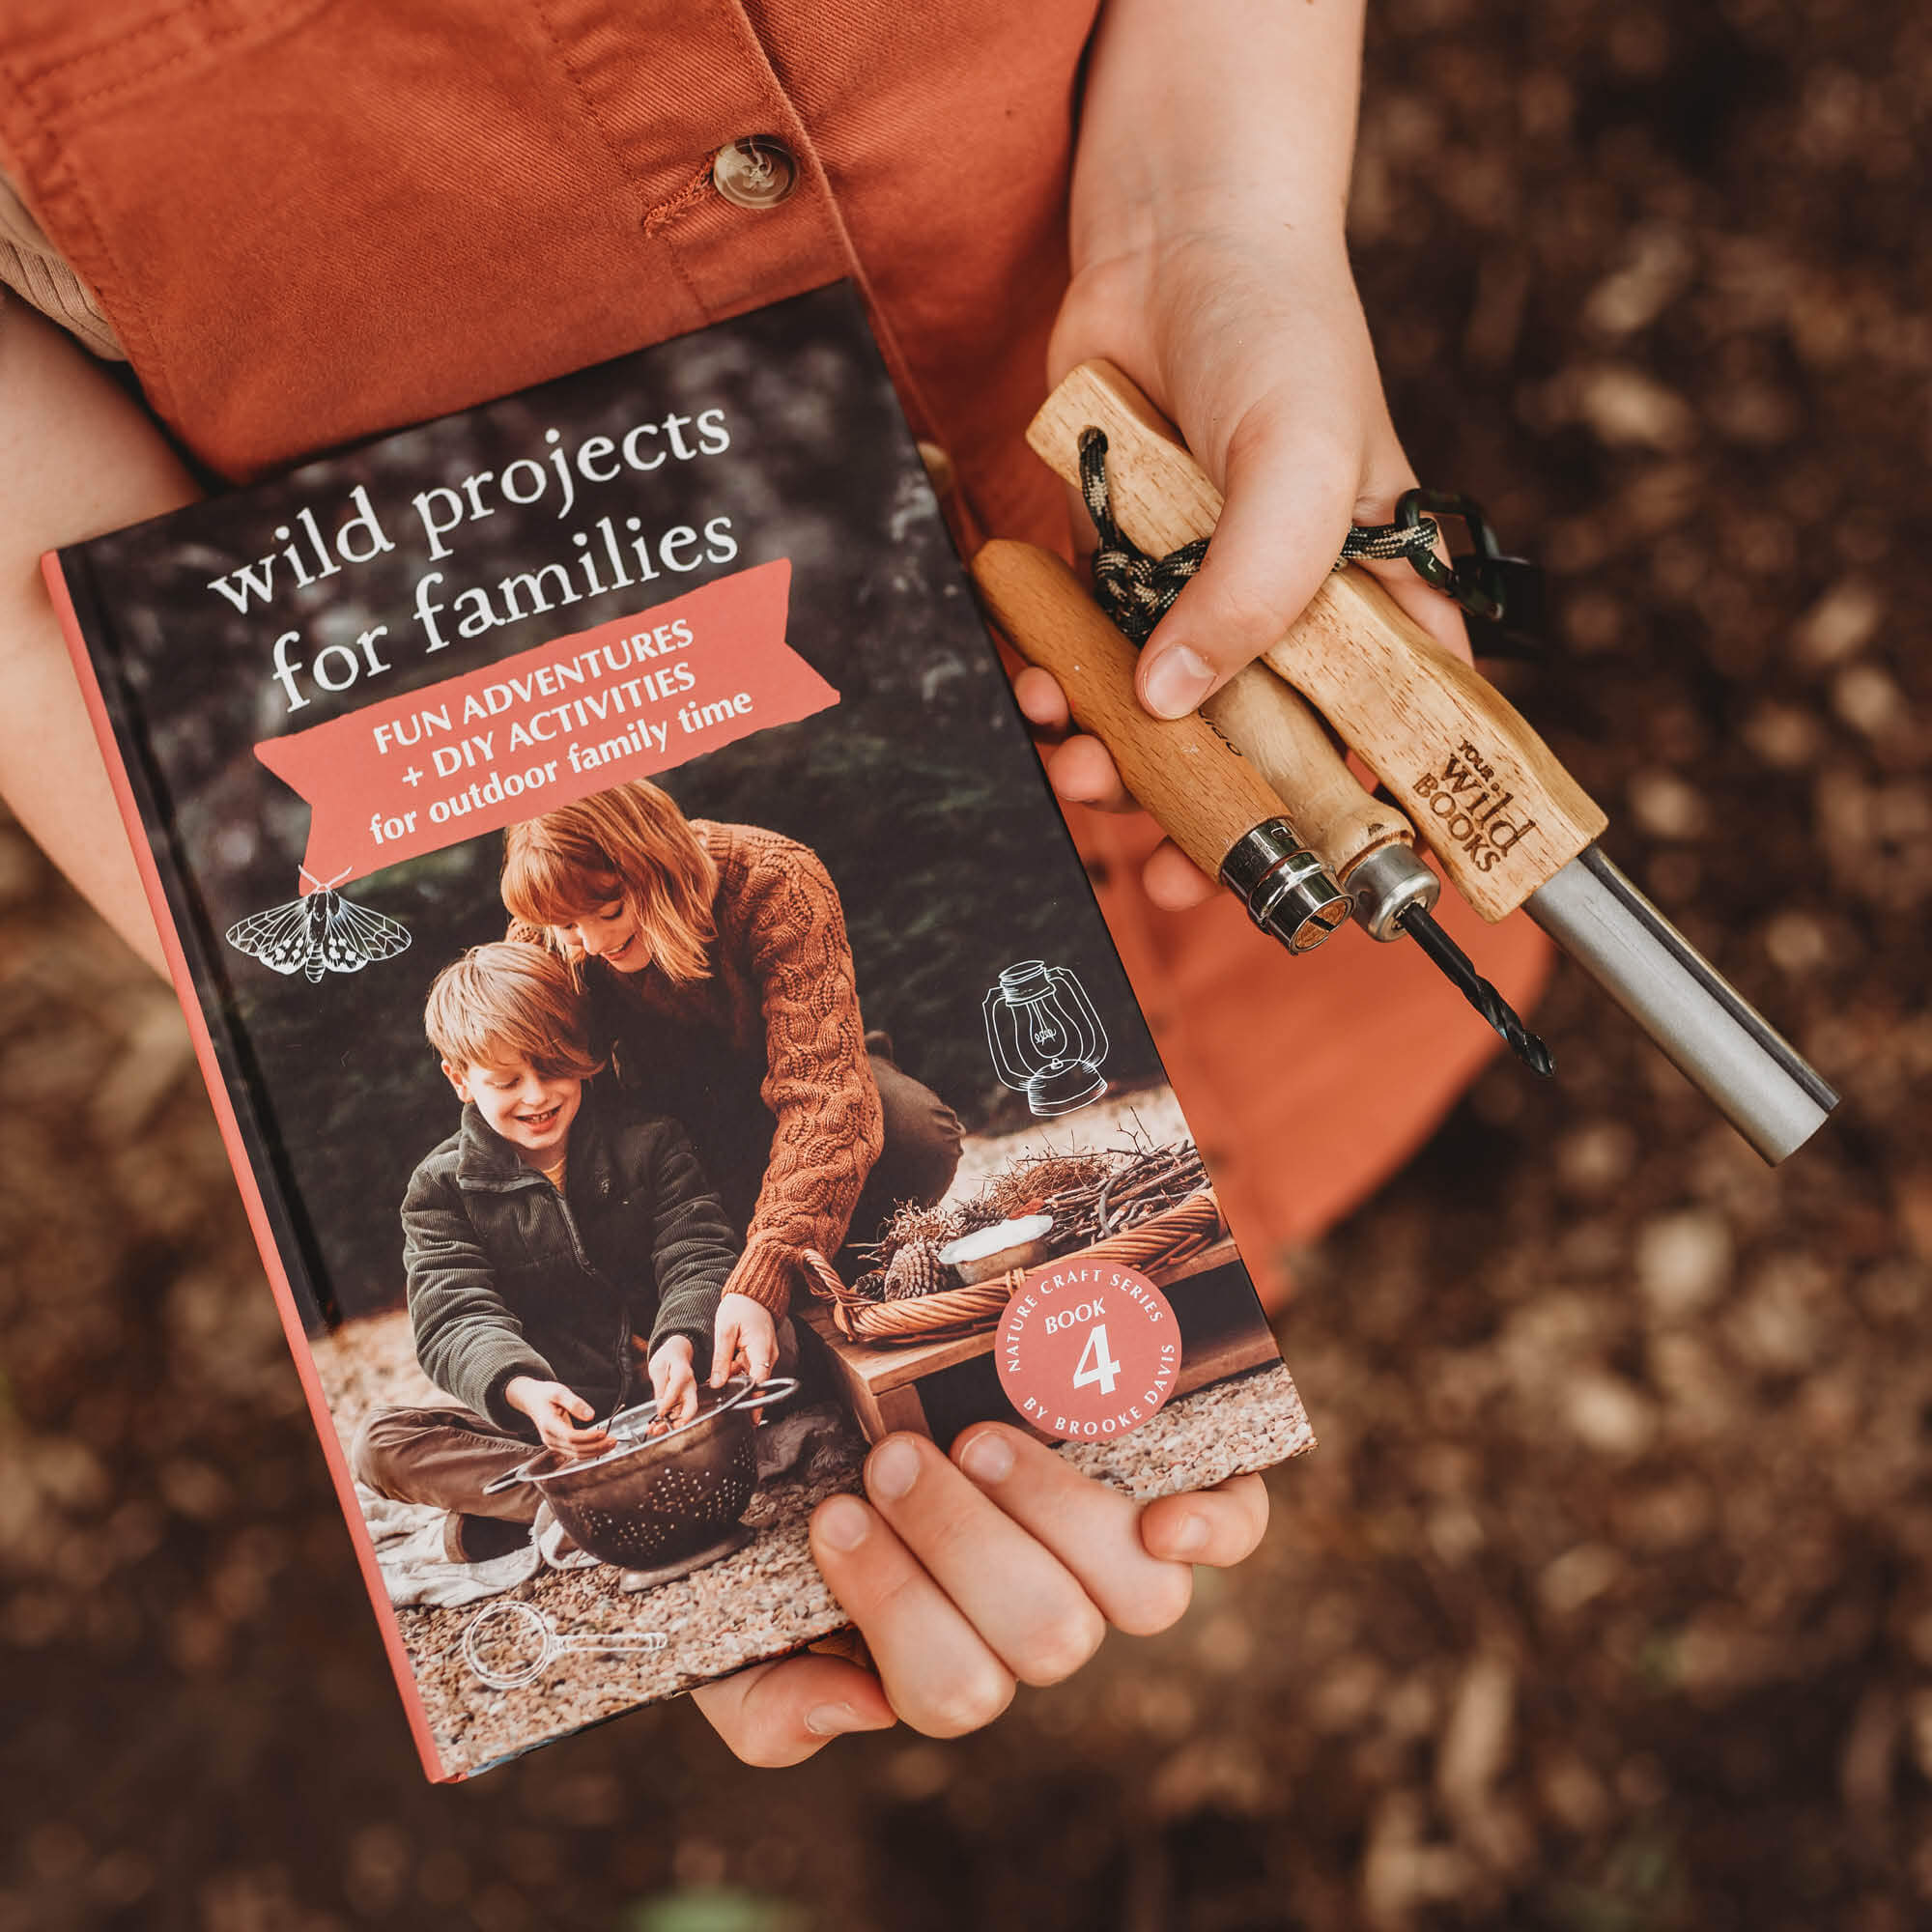 Child holding the Real Tools Bundle by Your Wild Books includes Wild Projects for Families book, whittling knife, hand drill and fire starter.